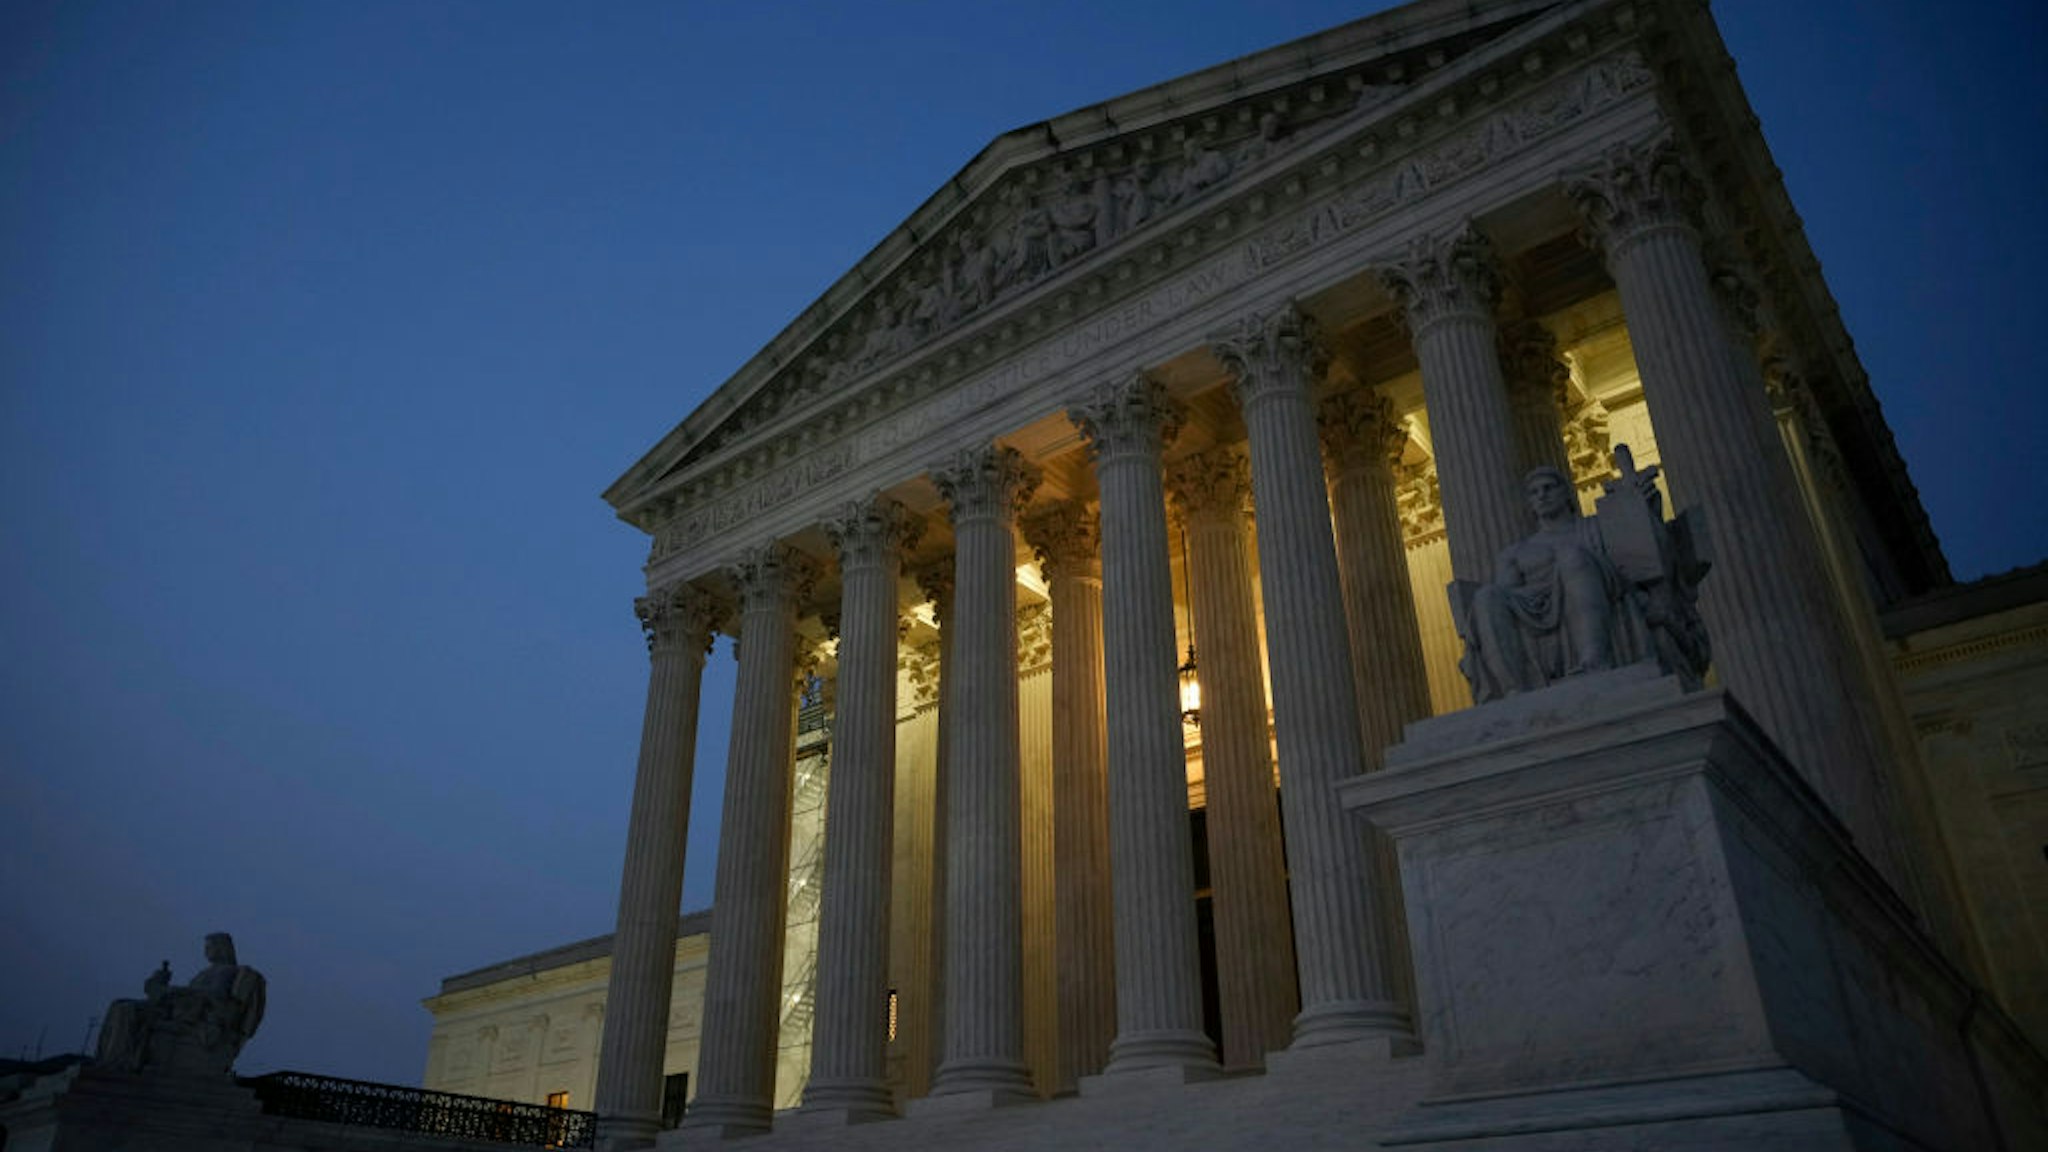 WASHINGTON, DC - JUNE 28: The U.S. Supreme Court is shown at dusk on June 28, 2023 in Washington, DC. The high court is expected to release more opinions tomorrow ahead of its summer recess, with cases involving affirmative action and student loan debt relief still to be decided. (Photo by Drew Angerer/Getty Images)